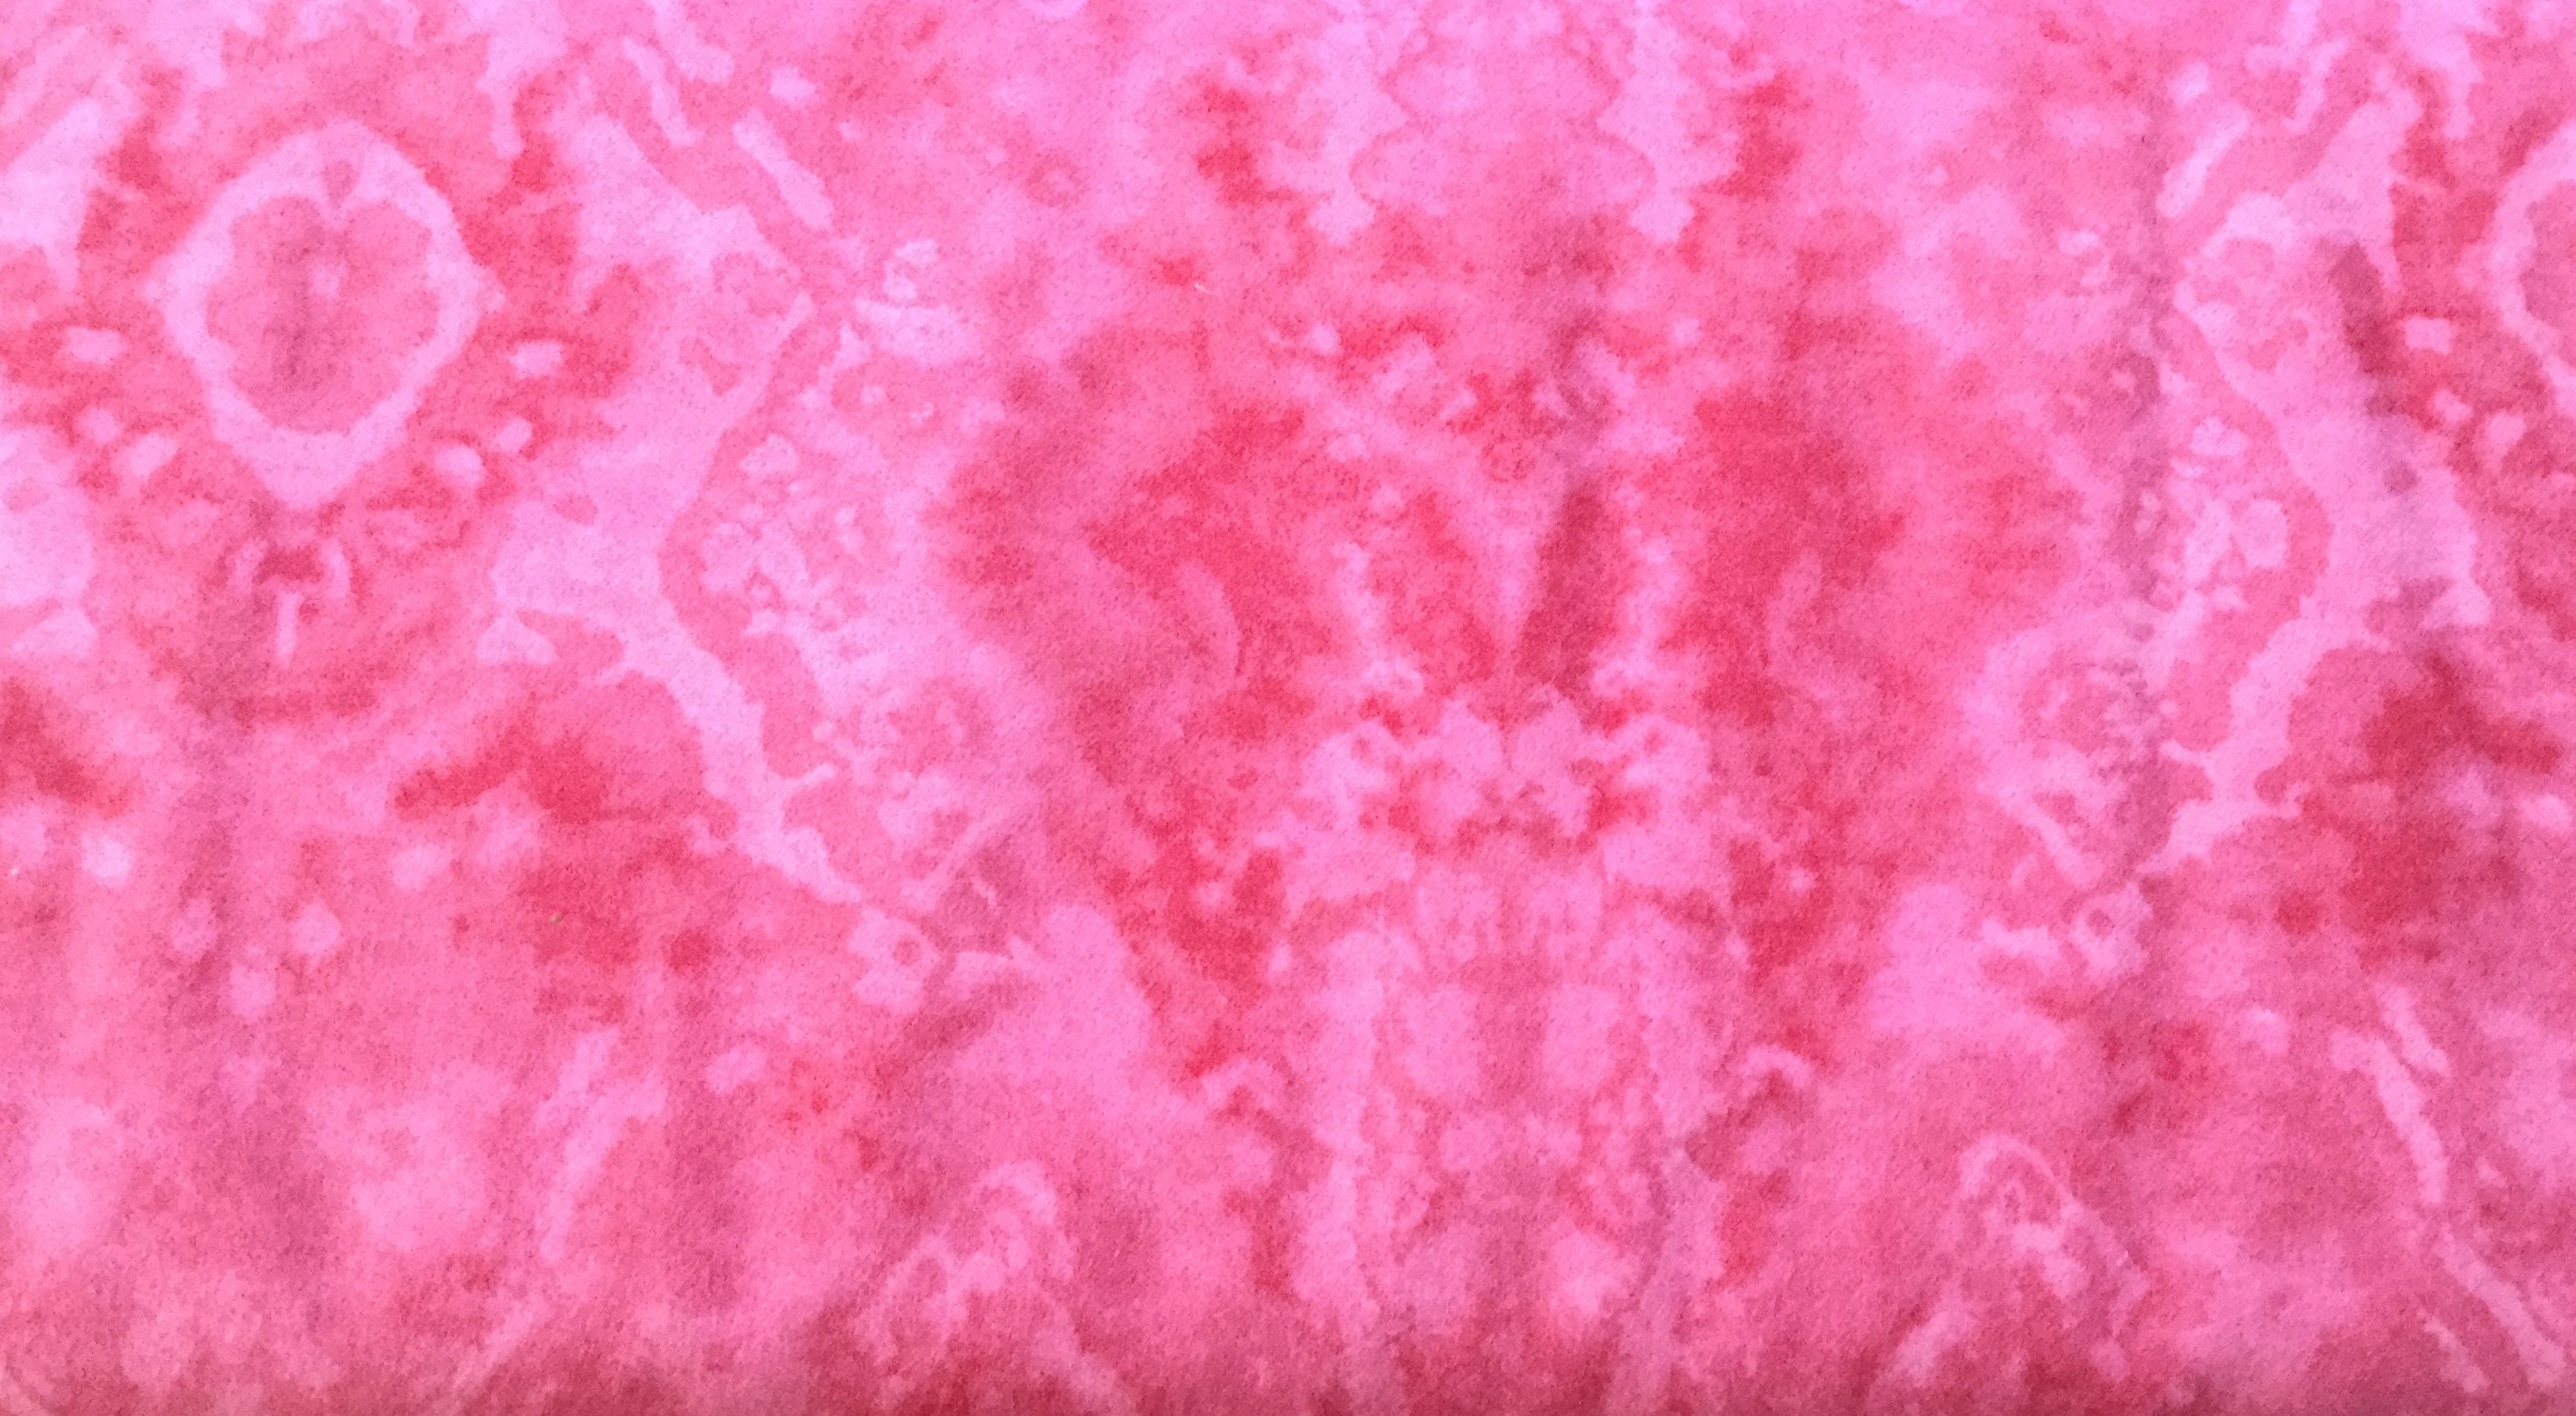 Flannel/Hot Pink Tonal Blender Cotton Fabric By The Yard